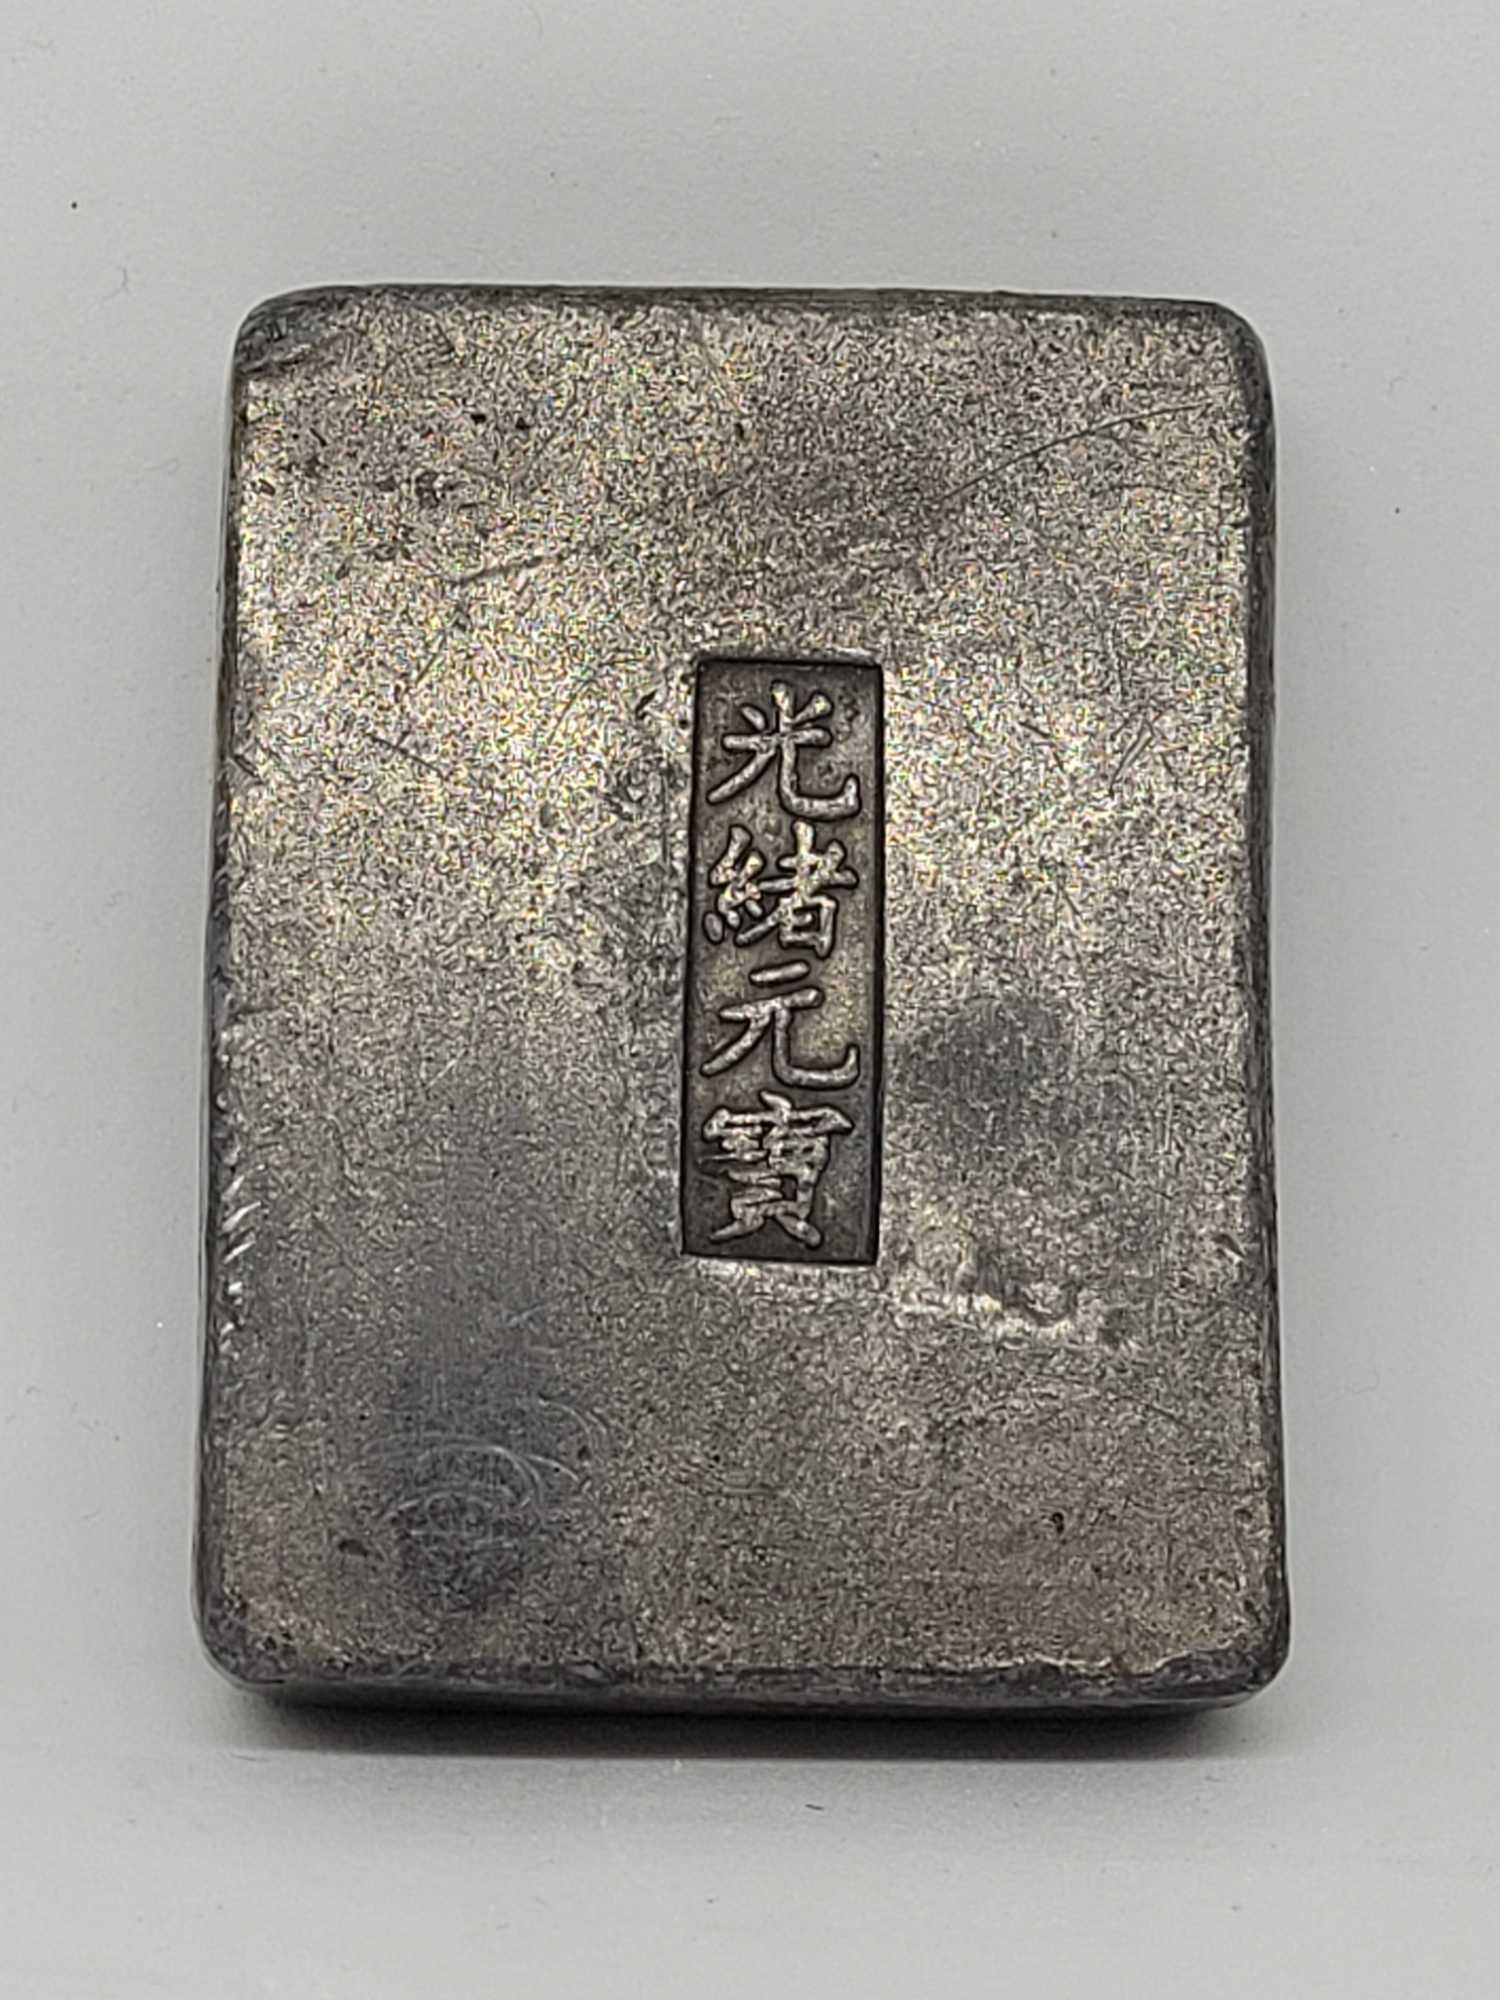 Unauthenticated Chinese Provincial Salt Tax Ingot, 273 Grams